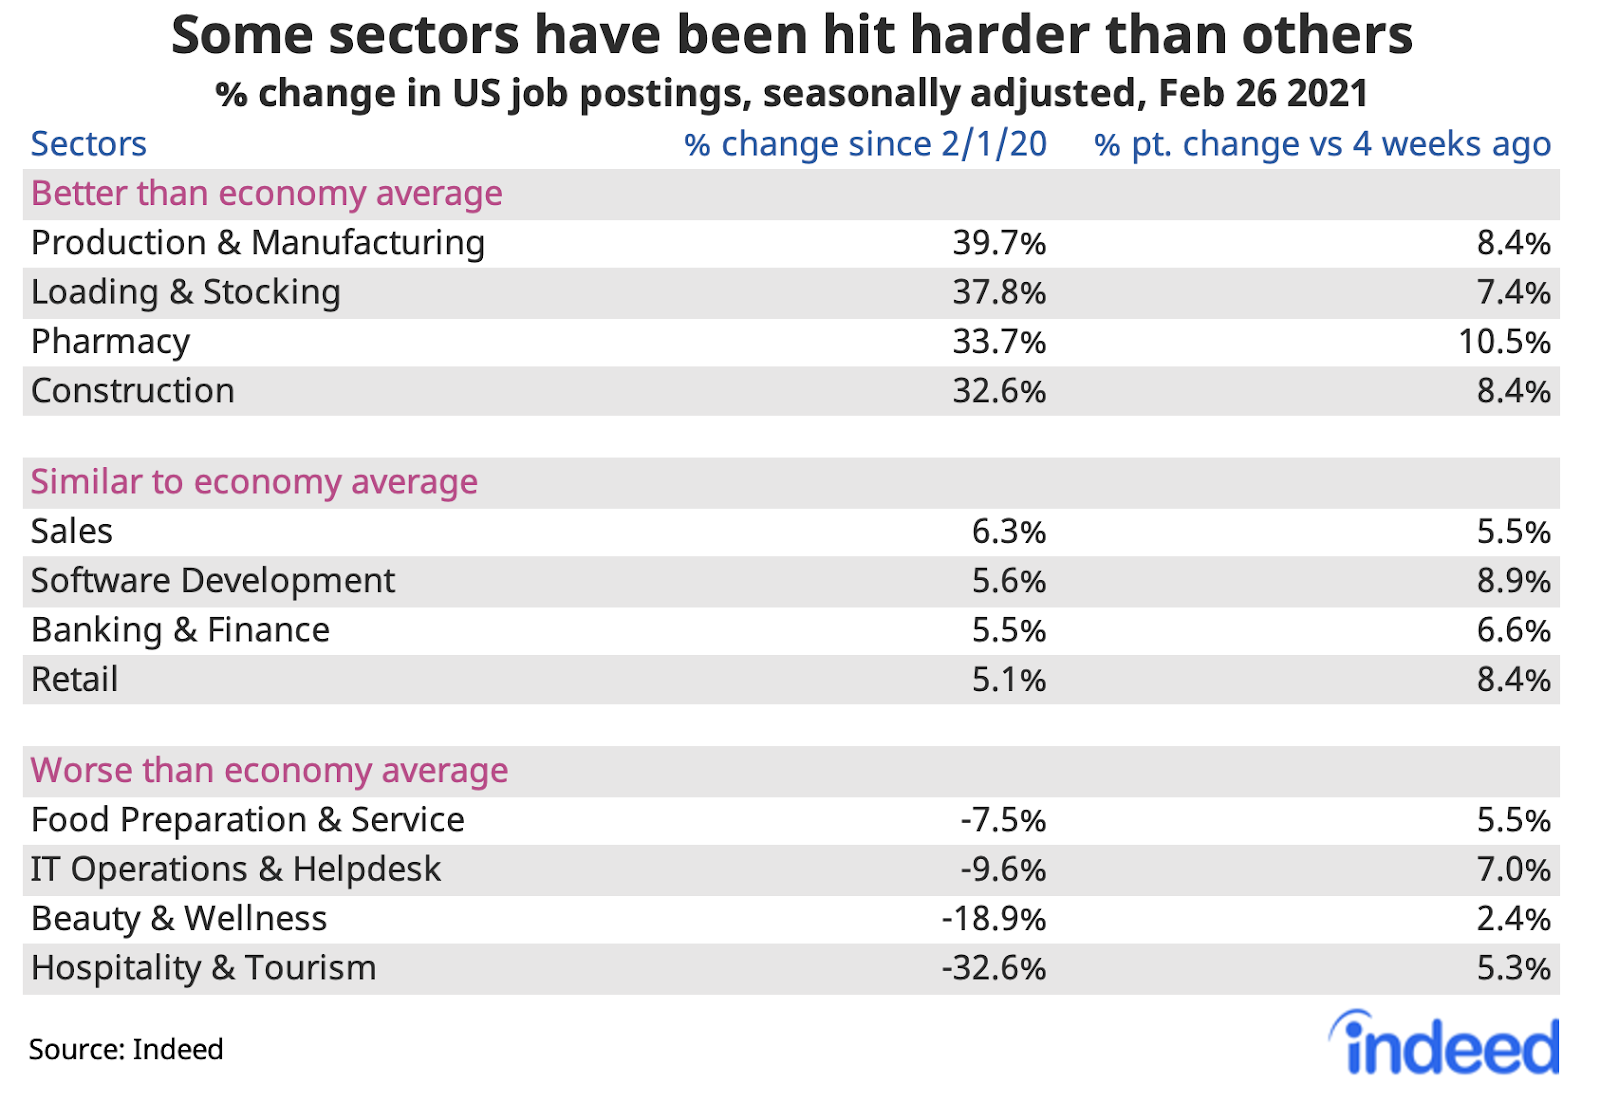 Table showing some industries have been hit harder than others since pandemic in US